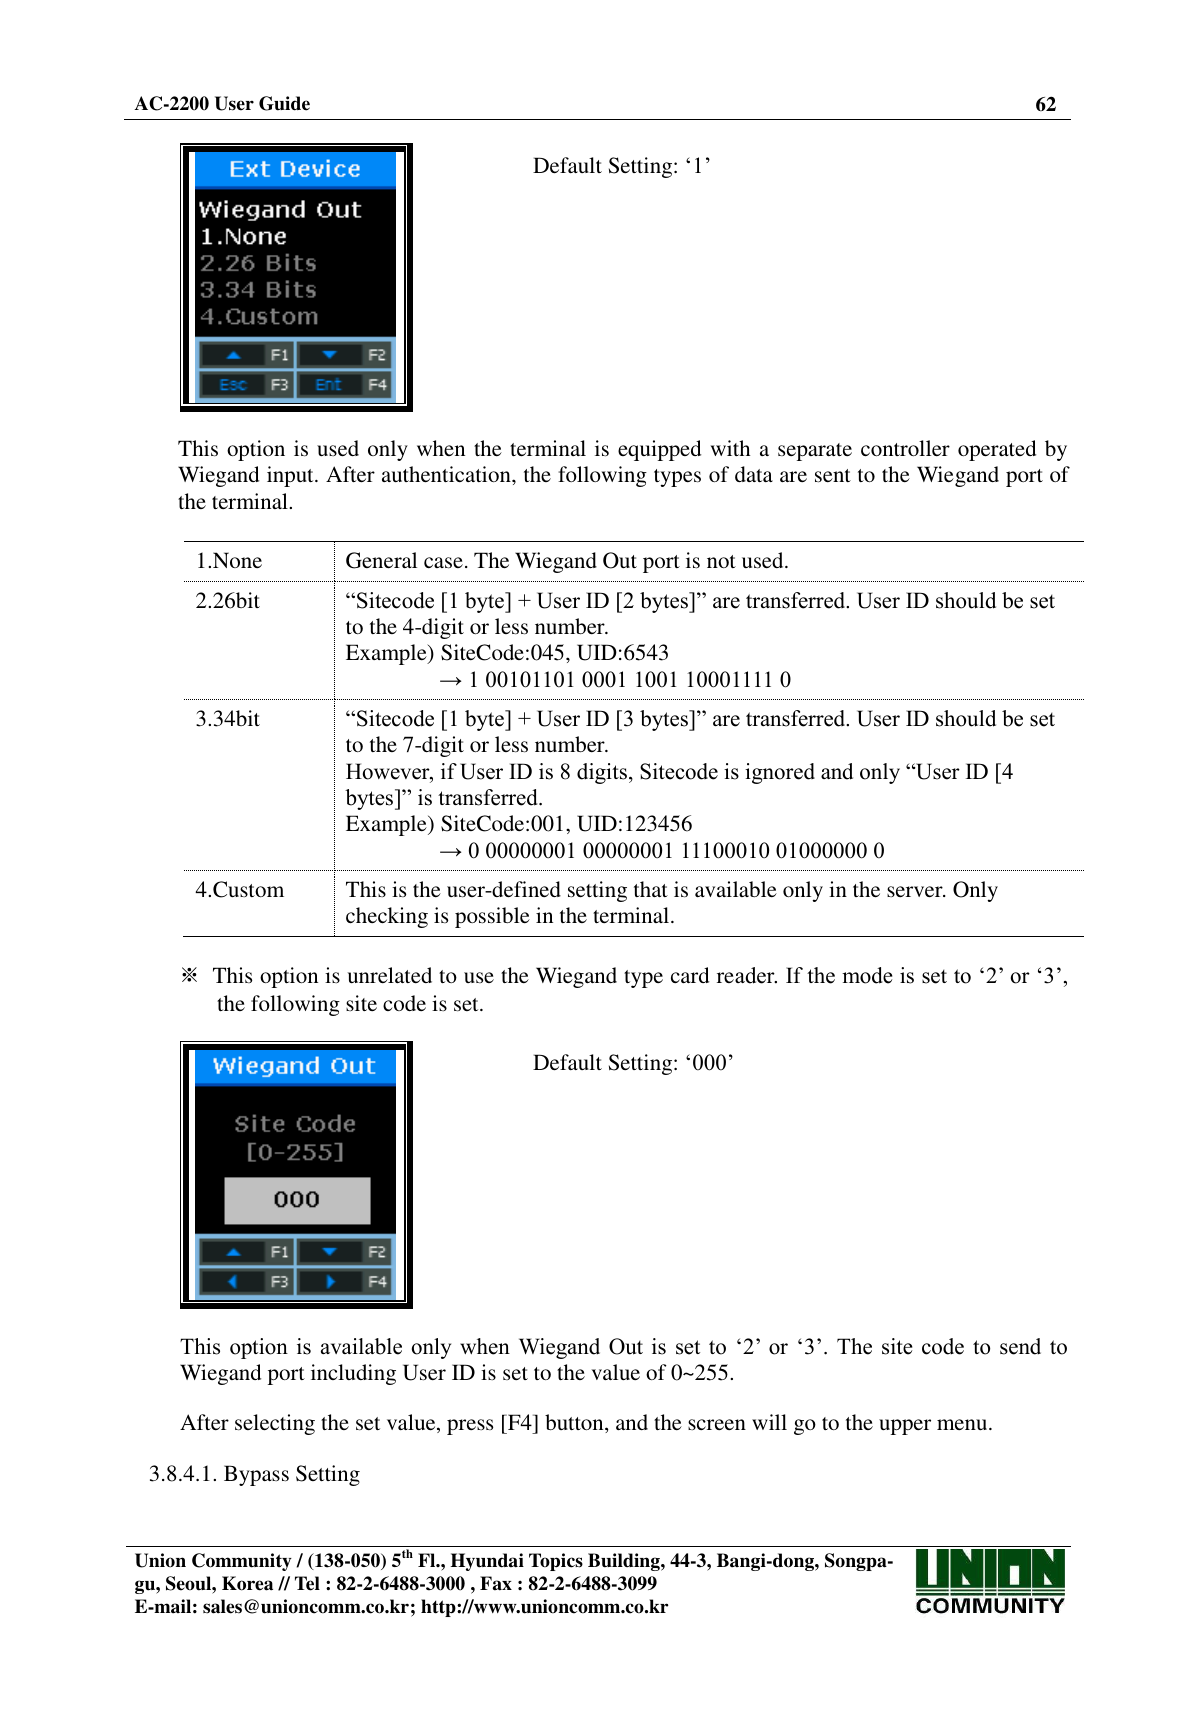  AC-2200 User Guide 62   Union Community / (138-050) 5th Fl., Hyundai Topics Building, 44-3, Bangi-dong, Songpa-gu, Seoul, Korea // Tel : 82-2-6488-3000 , Fax : 82-2-6488-3099 E-mail: sales@unioncomm.co.kr; http://www.unioncomm.co.kr     Default Setting: ‘1’   This option is used only when the terminal is equipped with a separate controller operated by Wiegand input. After authentication, the following types of data are sent to the Wiegand port of the terminal.  1.None General case. The Wiegand Out port is not used. 2.26bit  “Sitecode [1 byte] + User ID [2 bytes]” are transferred. User ID should be set to the 4-digit or less number. Example) SiteCode:045, UID:6543 → 1 00101101 0001 1001 10001111 0 3.34bit  “Sitecode [1 byte] + User ID [3 bytes]” are transferred. User ID should be set to the 7-digit or less number. However, if User ID is 8 digits, Sitecode is ignored and only “User ID [4 bytes]” is transferred. Example) SiteCode:001, UID:123456 → 0 00000001 00000001 11100010 01000000 0 4.Custom This is the user-defined setting that is available only in the server. Only checking is possible in the terminal.  ※  This option is unrelated to use the Wiegand type card reader. If the mode is set to ‘2’ or ‘3’, the following site code is set.    Default Setting: ‘000’   This  option  is  available only when  Wiegand  Out is  set  to  ‘2’  or  ‘3’. The site  code  to  send  to Wiegand port including User ID is set to the value of 0~255.  After selecting the set value, press [F4] button, and the screen will go to the upper menu.  3.8.4.1. Bypass Setting  